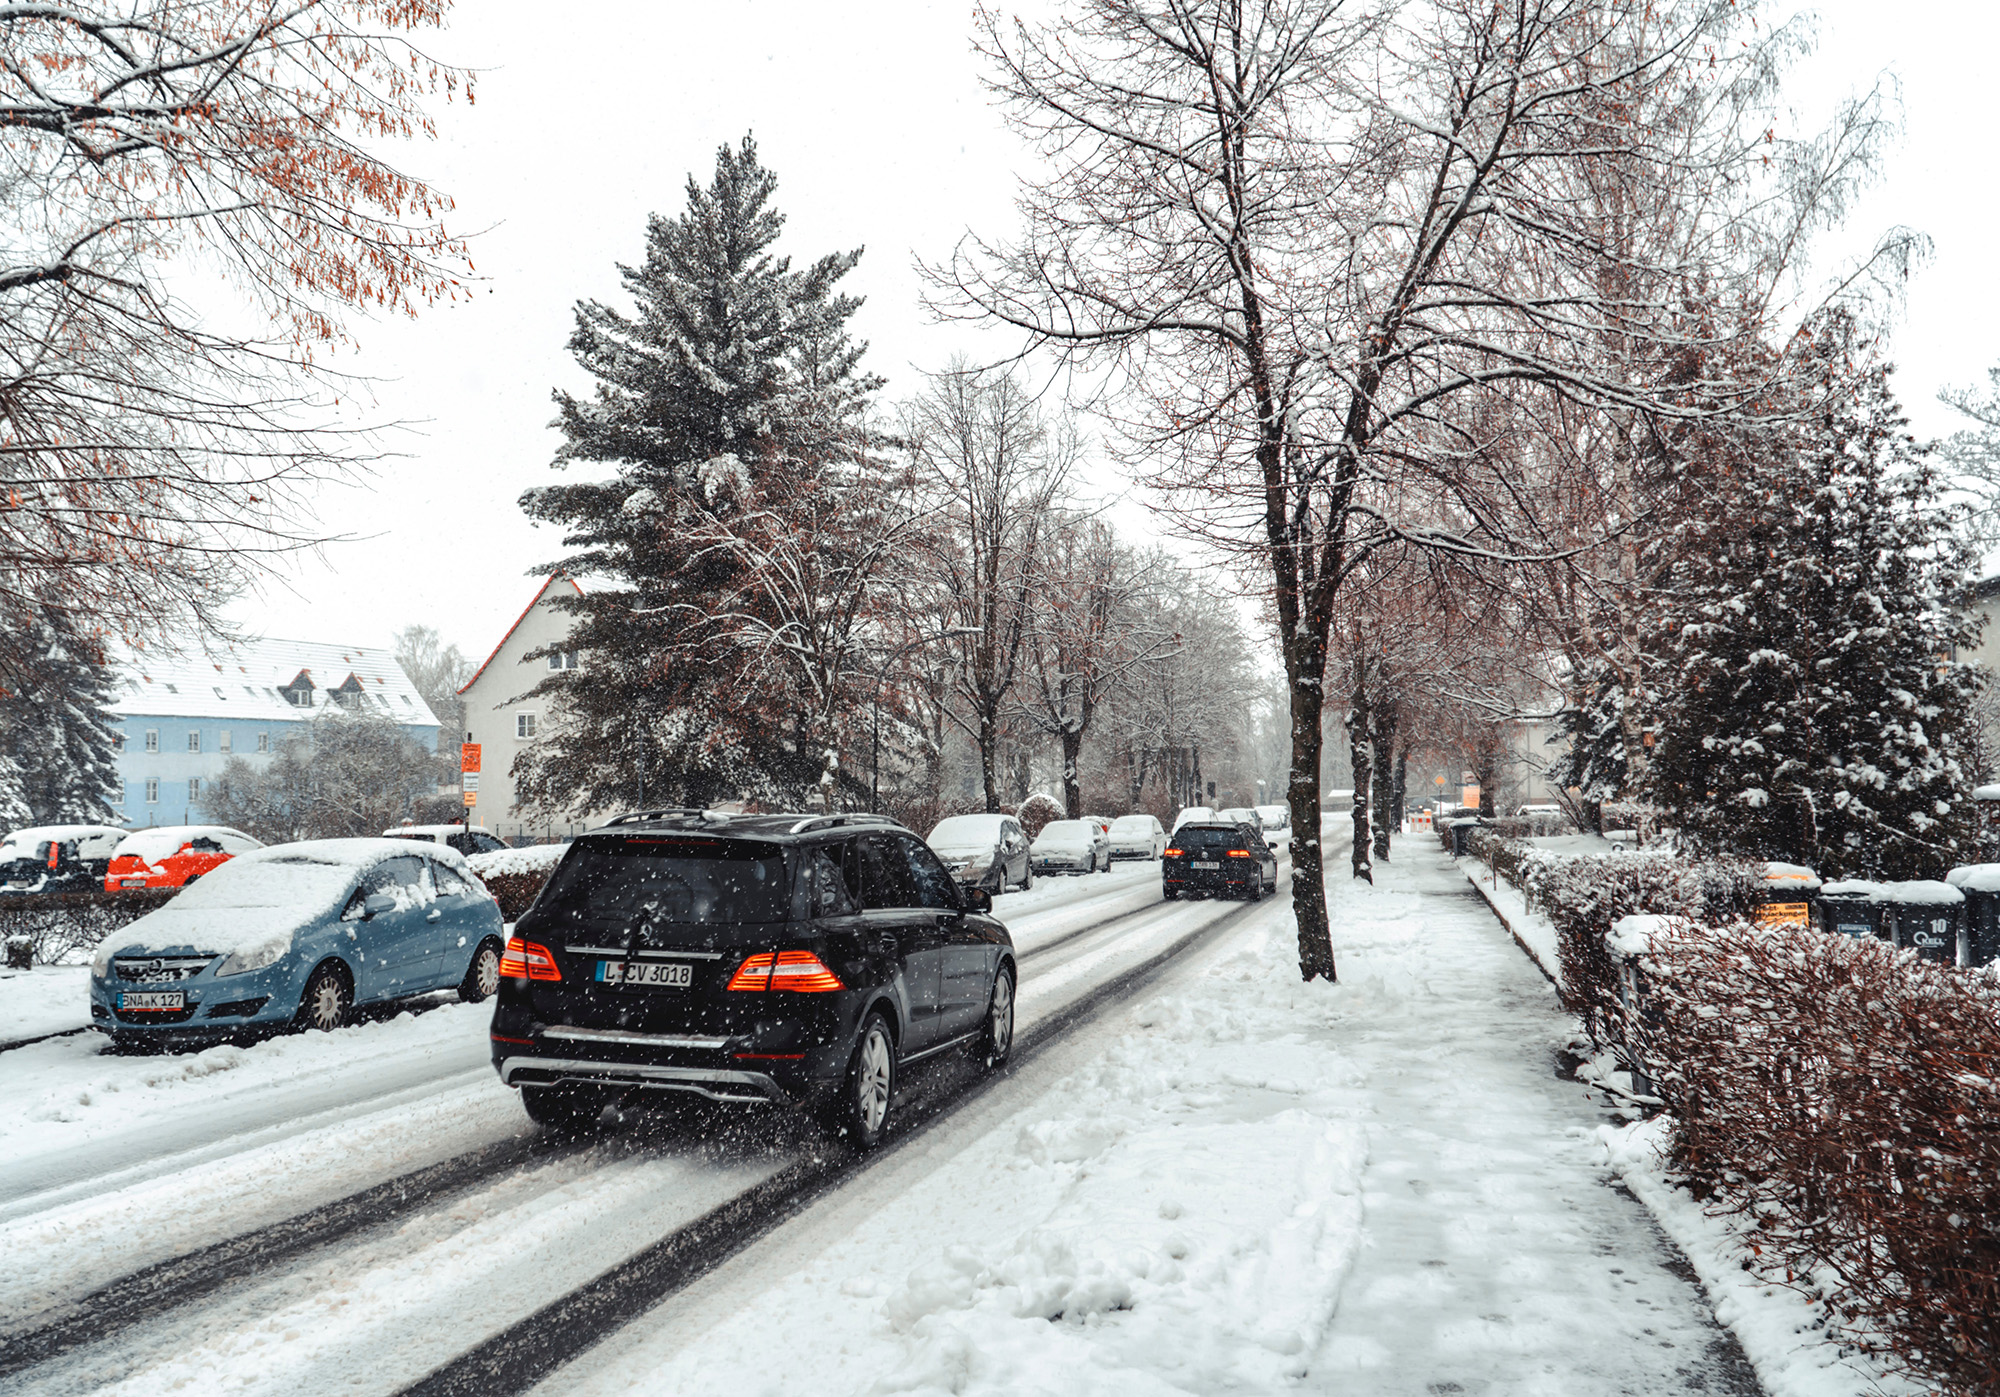 Best Windshield Snow Covers (Review) in 2023 - Old House Journal